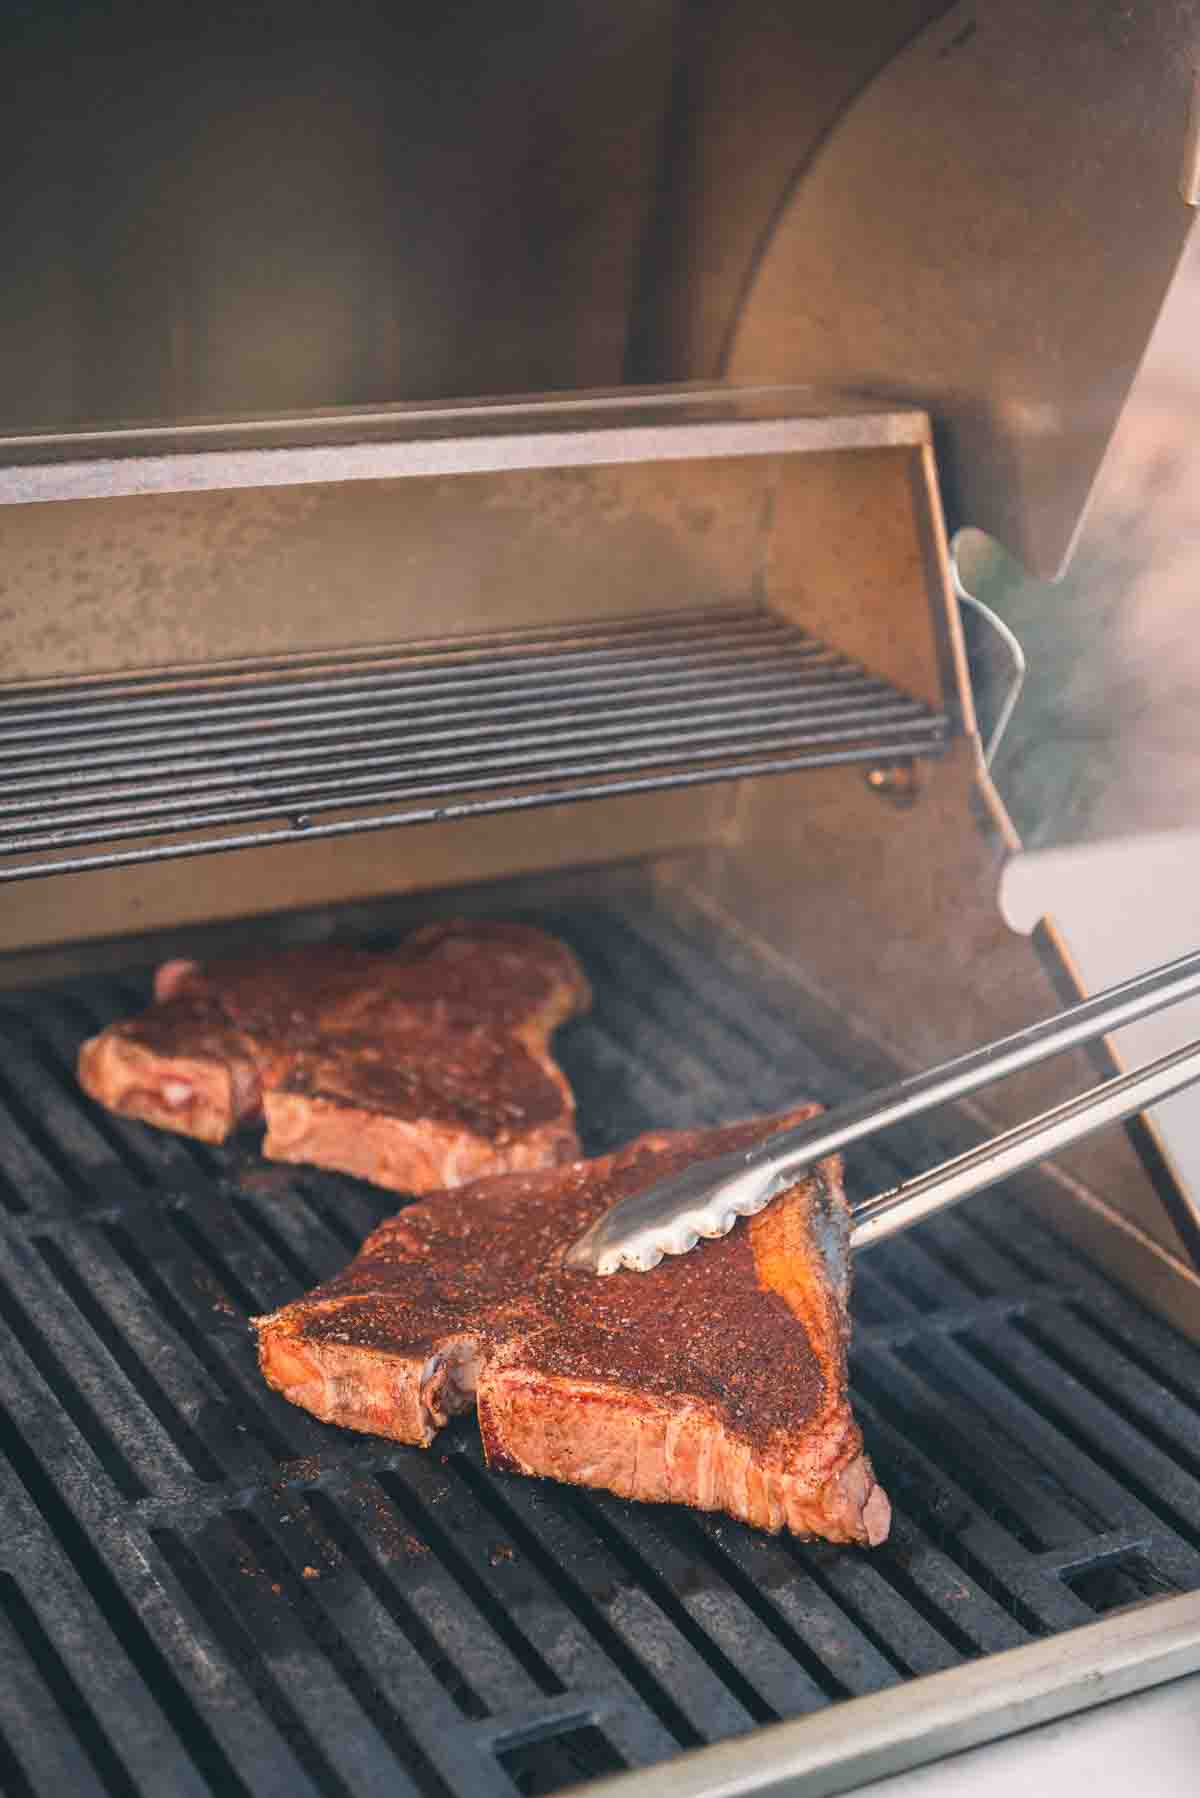 Steaks being flipped with tongs.